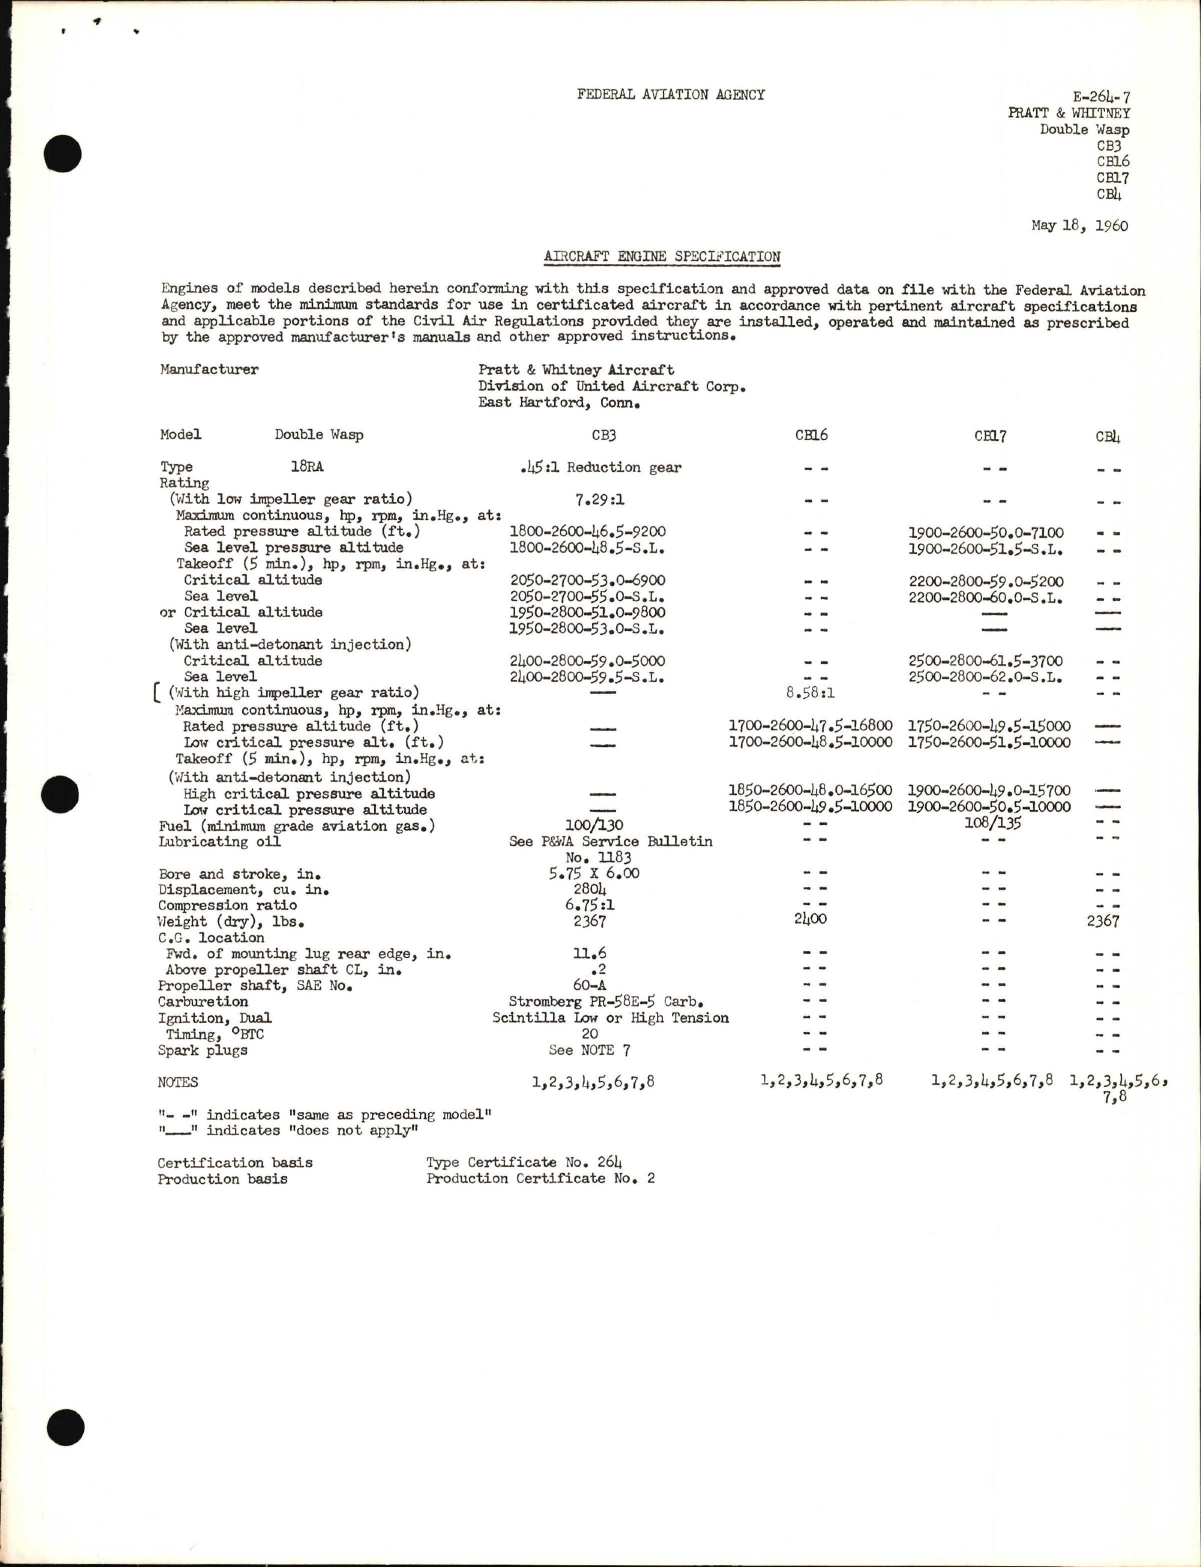 Sample page 1 from AirCorps Library document: CB3, 4, 16, and 17 Double Wasp